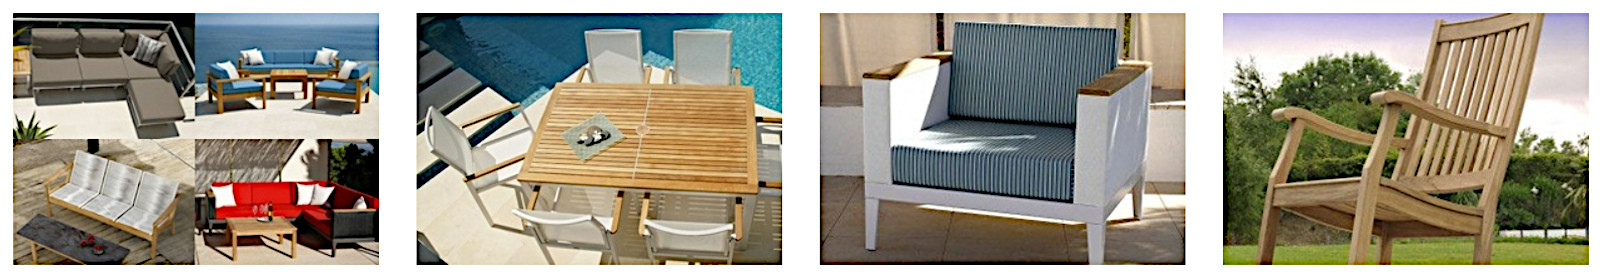 Discounted premium Barlow Tyrie outdoor furniture